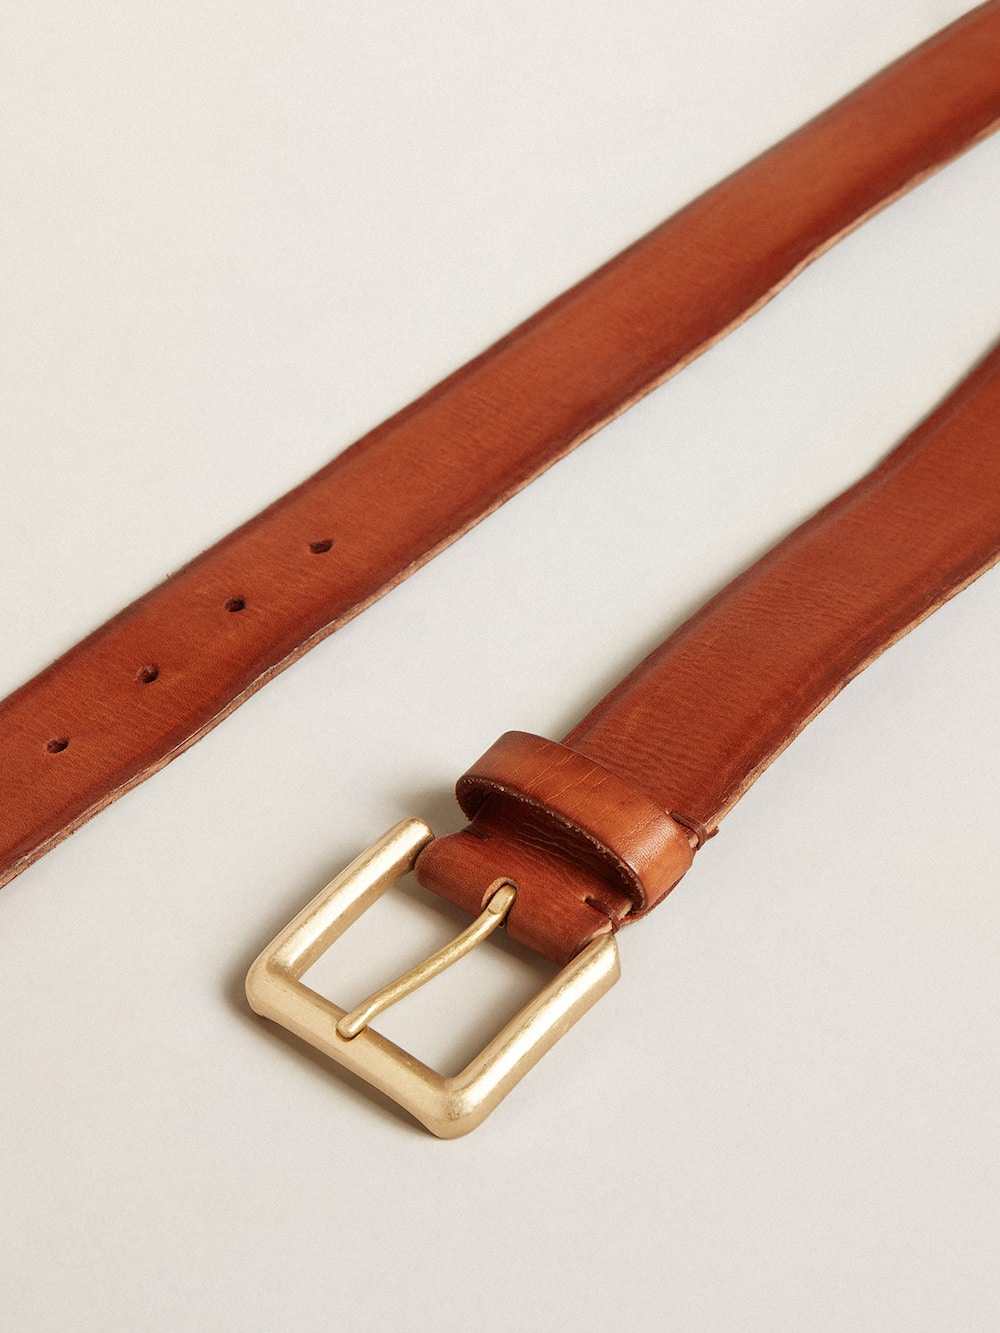 Golden Goose - Belt in tan-colored washed leather with raised print in 